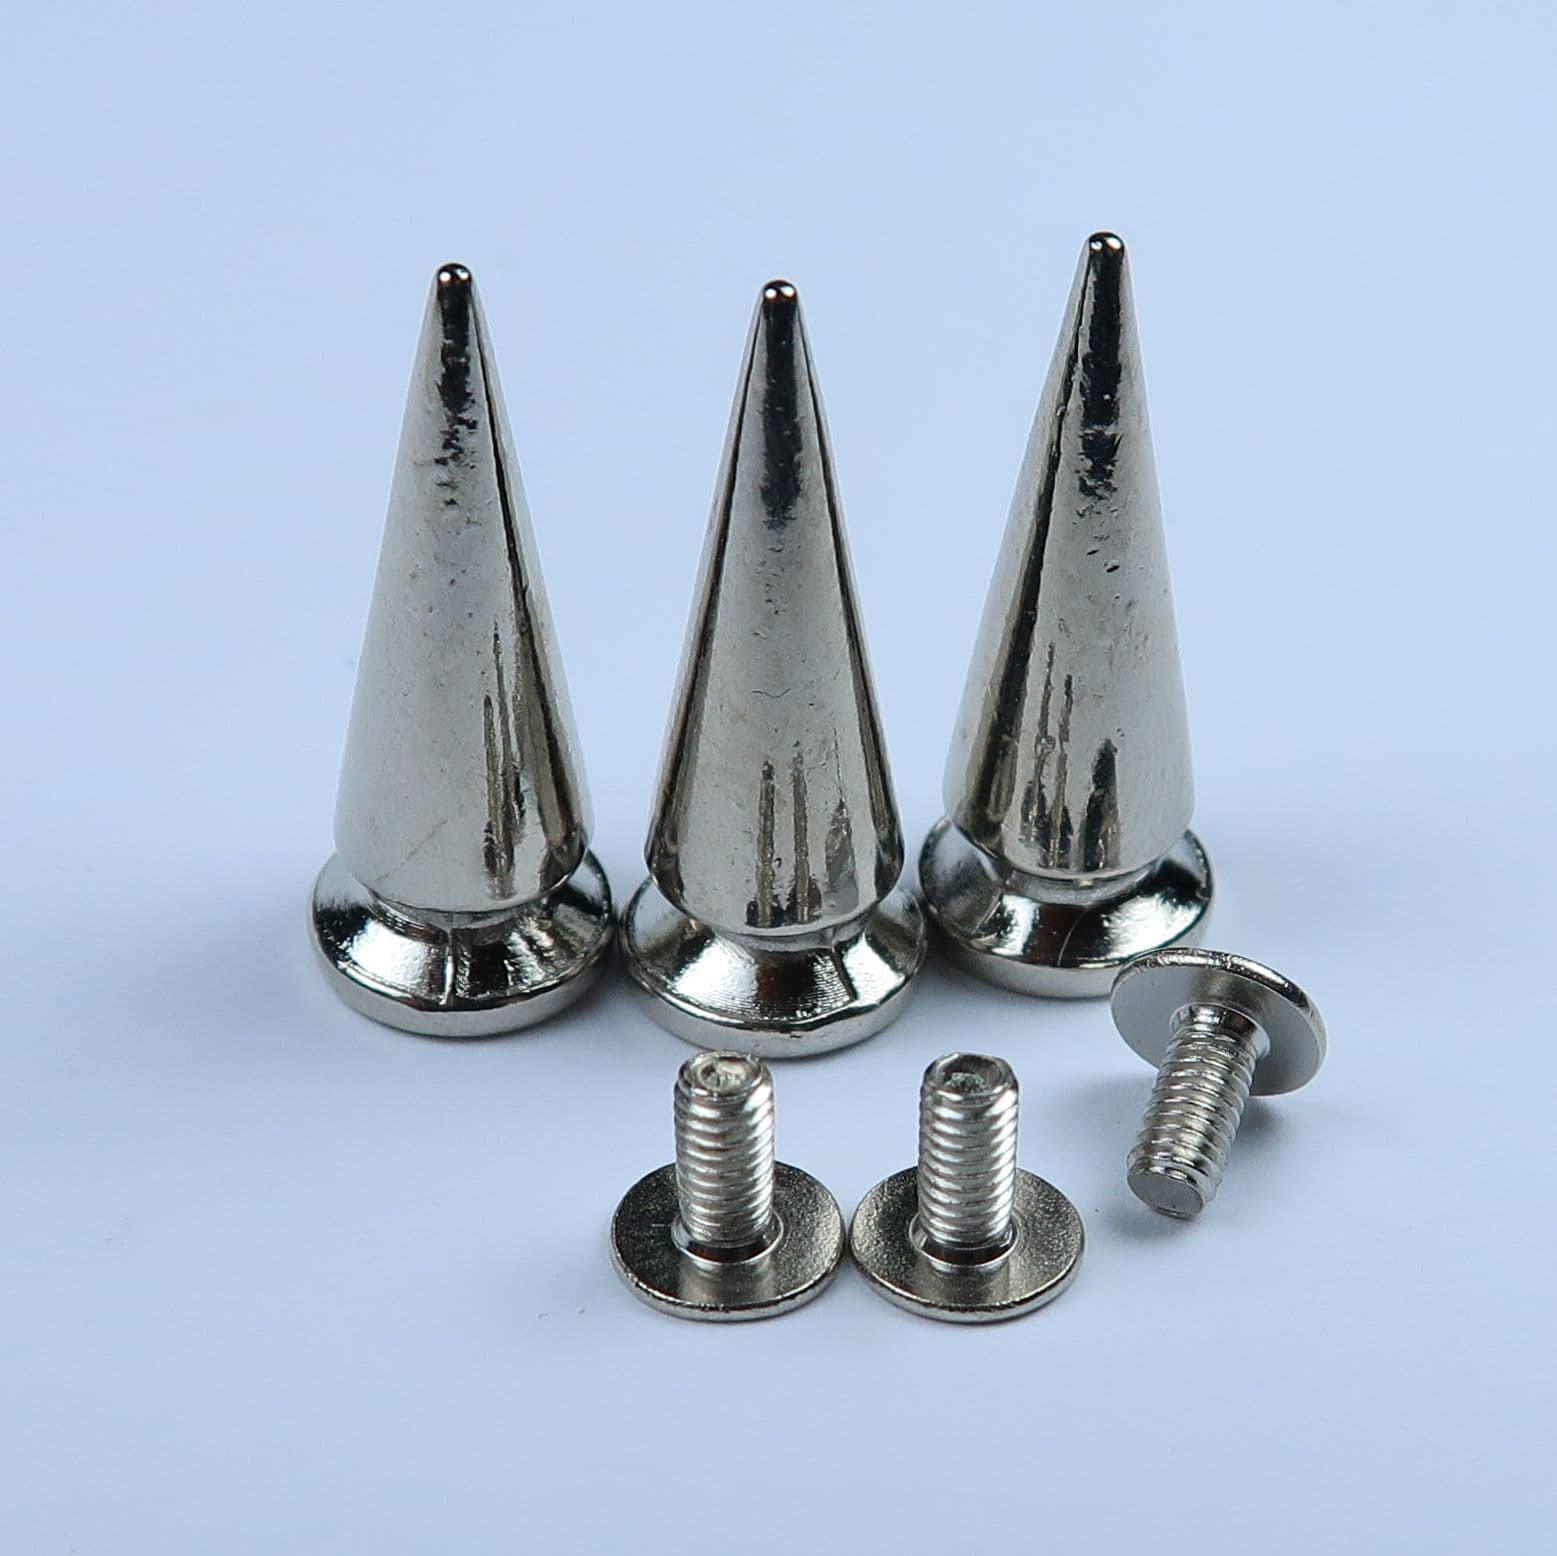 https://static-c42e.kxcdn.com/wp-content/uploads/2021/08/Spiked-metal-studs-with-screw-fittings_6.jpg